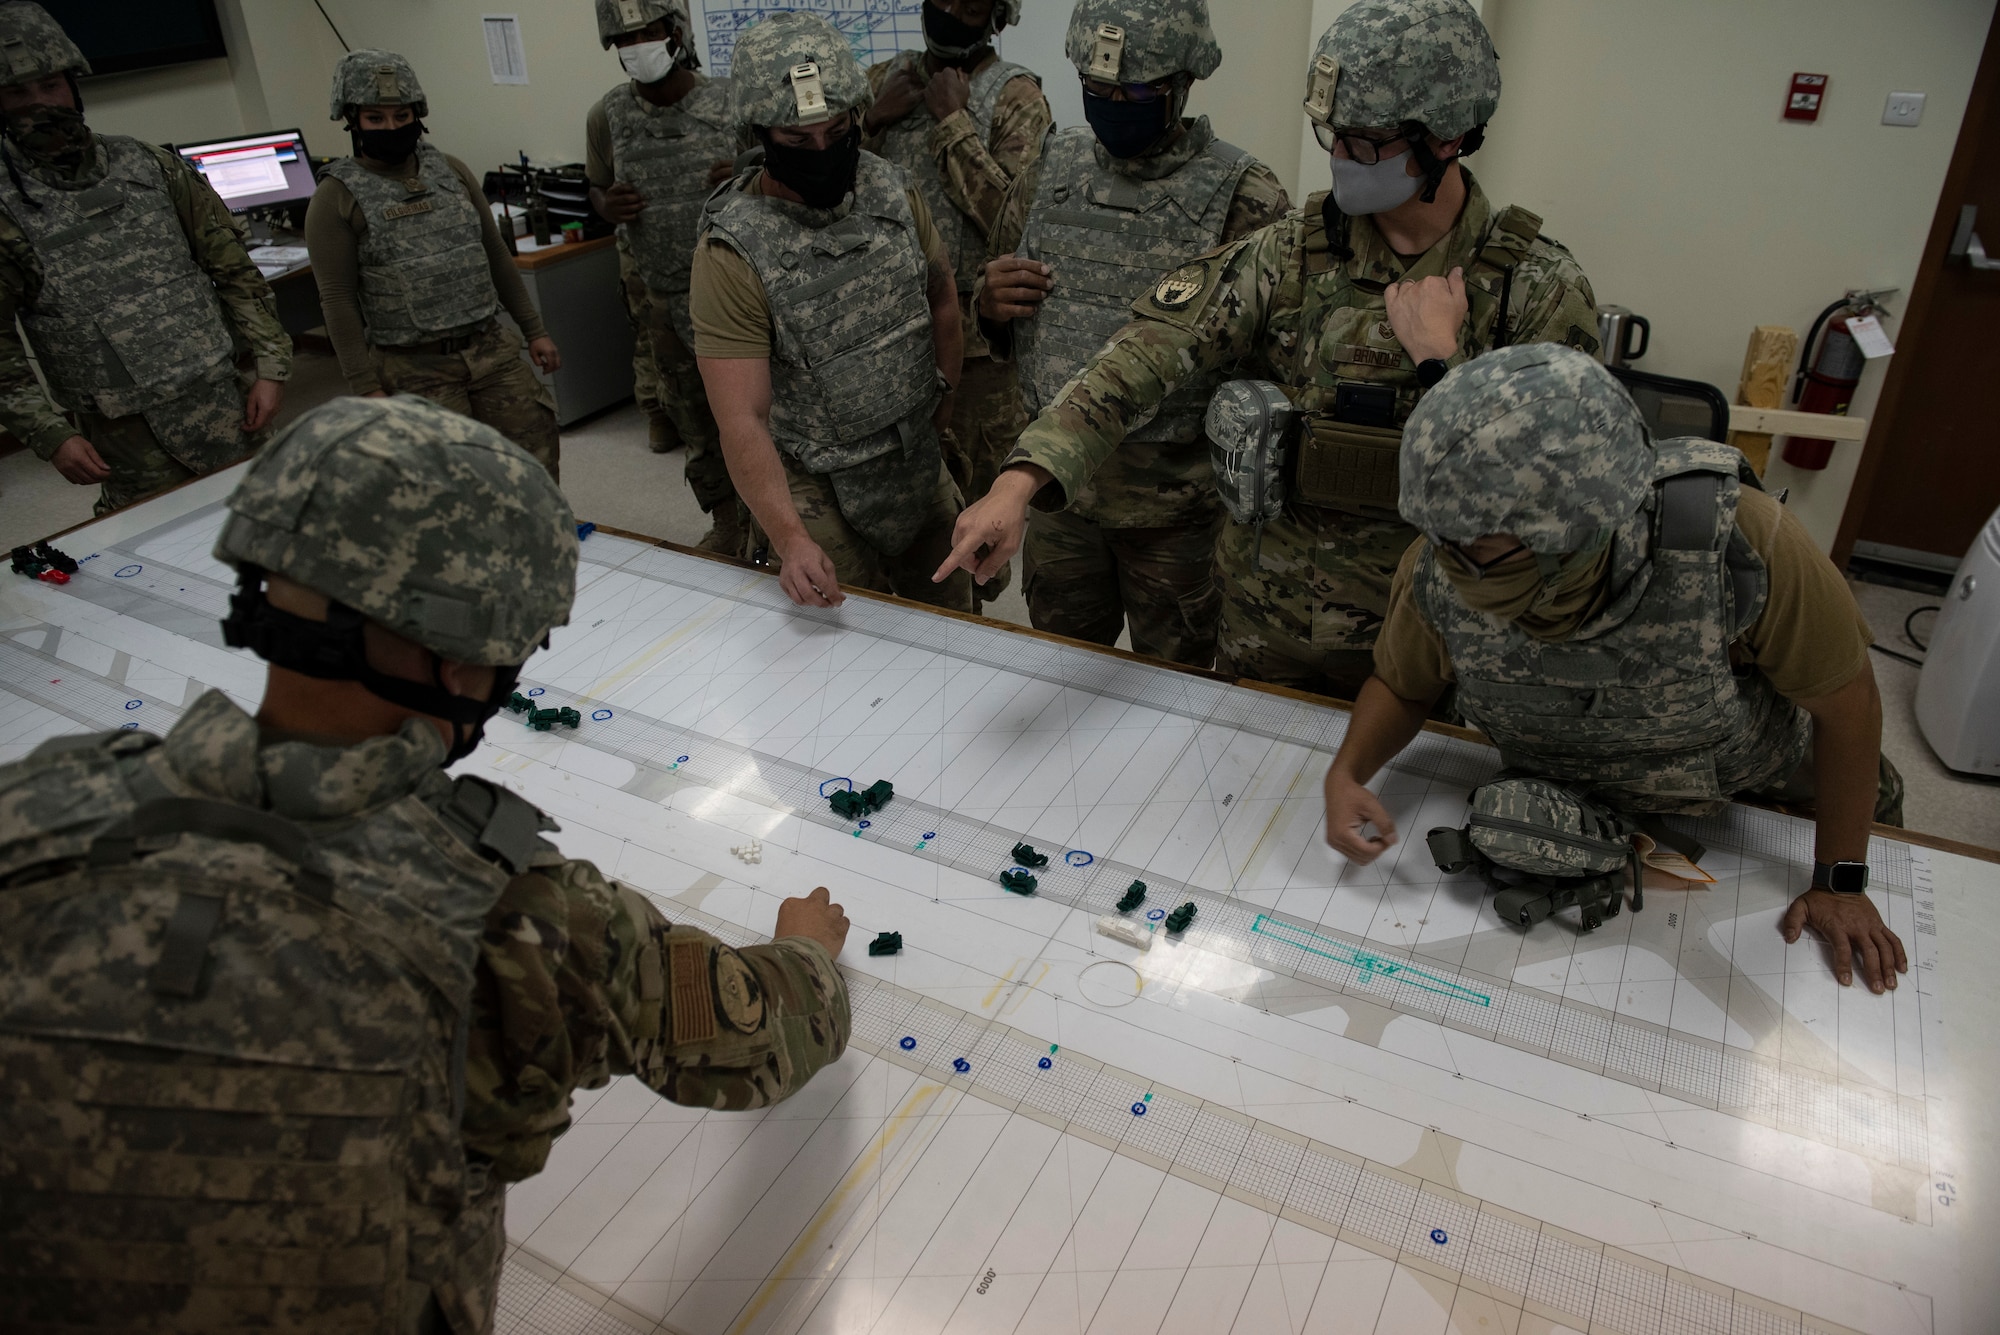 U.S. Air Force Airmen from the 386th Expeditionary Civil Engineer Squadron perform a tabletop exercise after a simulated attack during the Air and Missile Defense Exercise 21-1 at Ali Al Salem Air Base, Kuwait, Oct. 22, 2020.